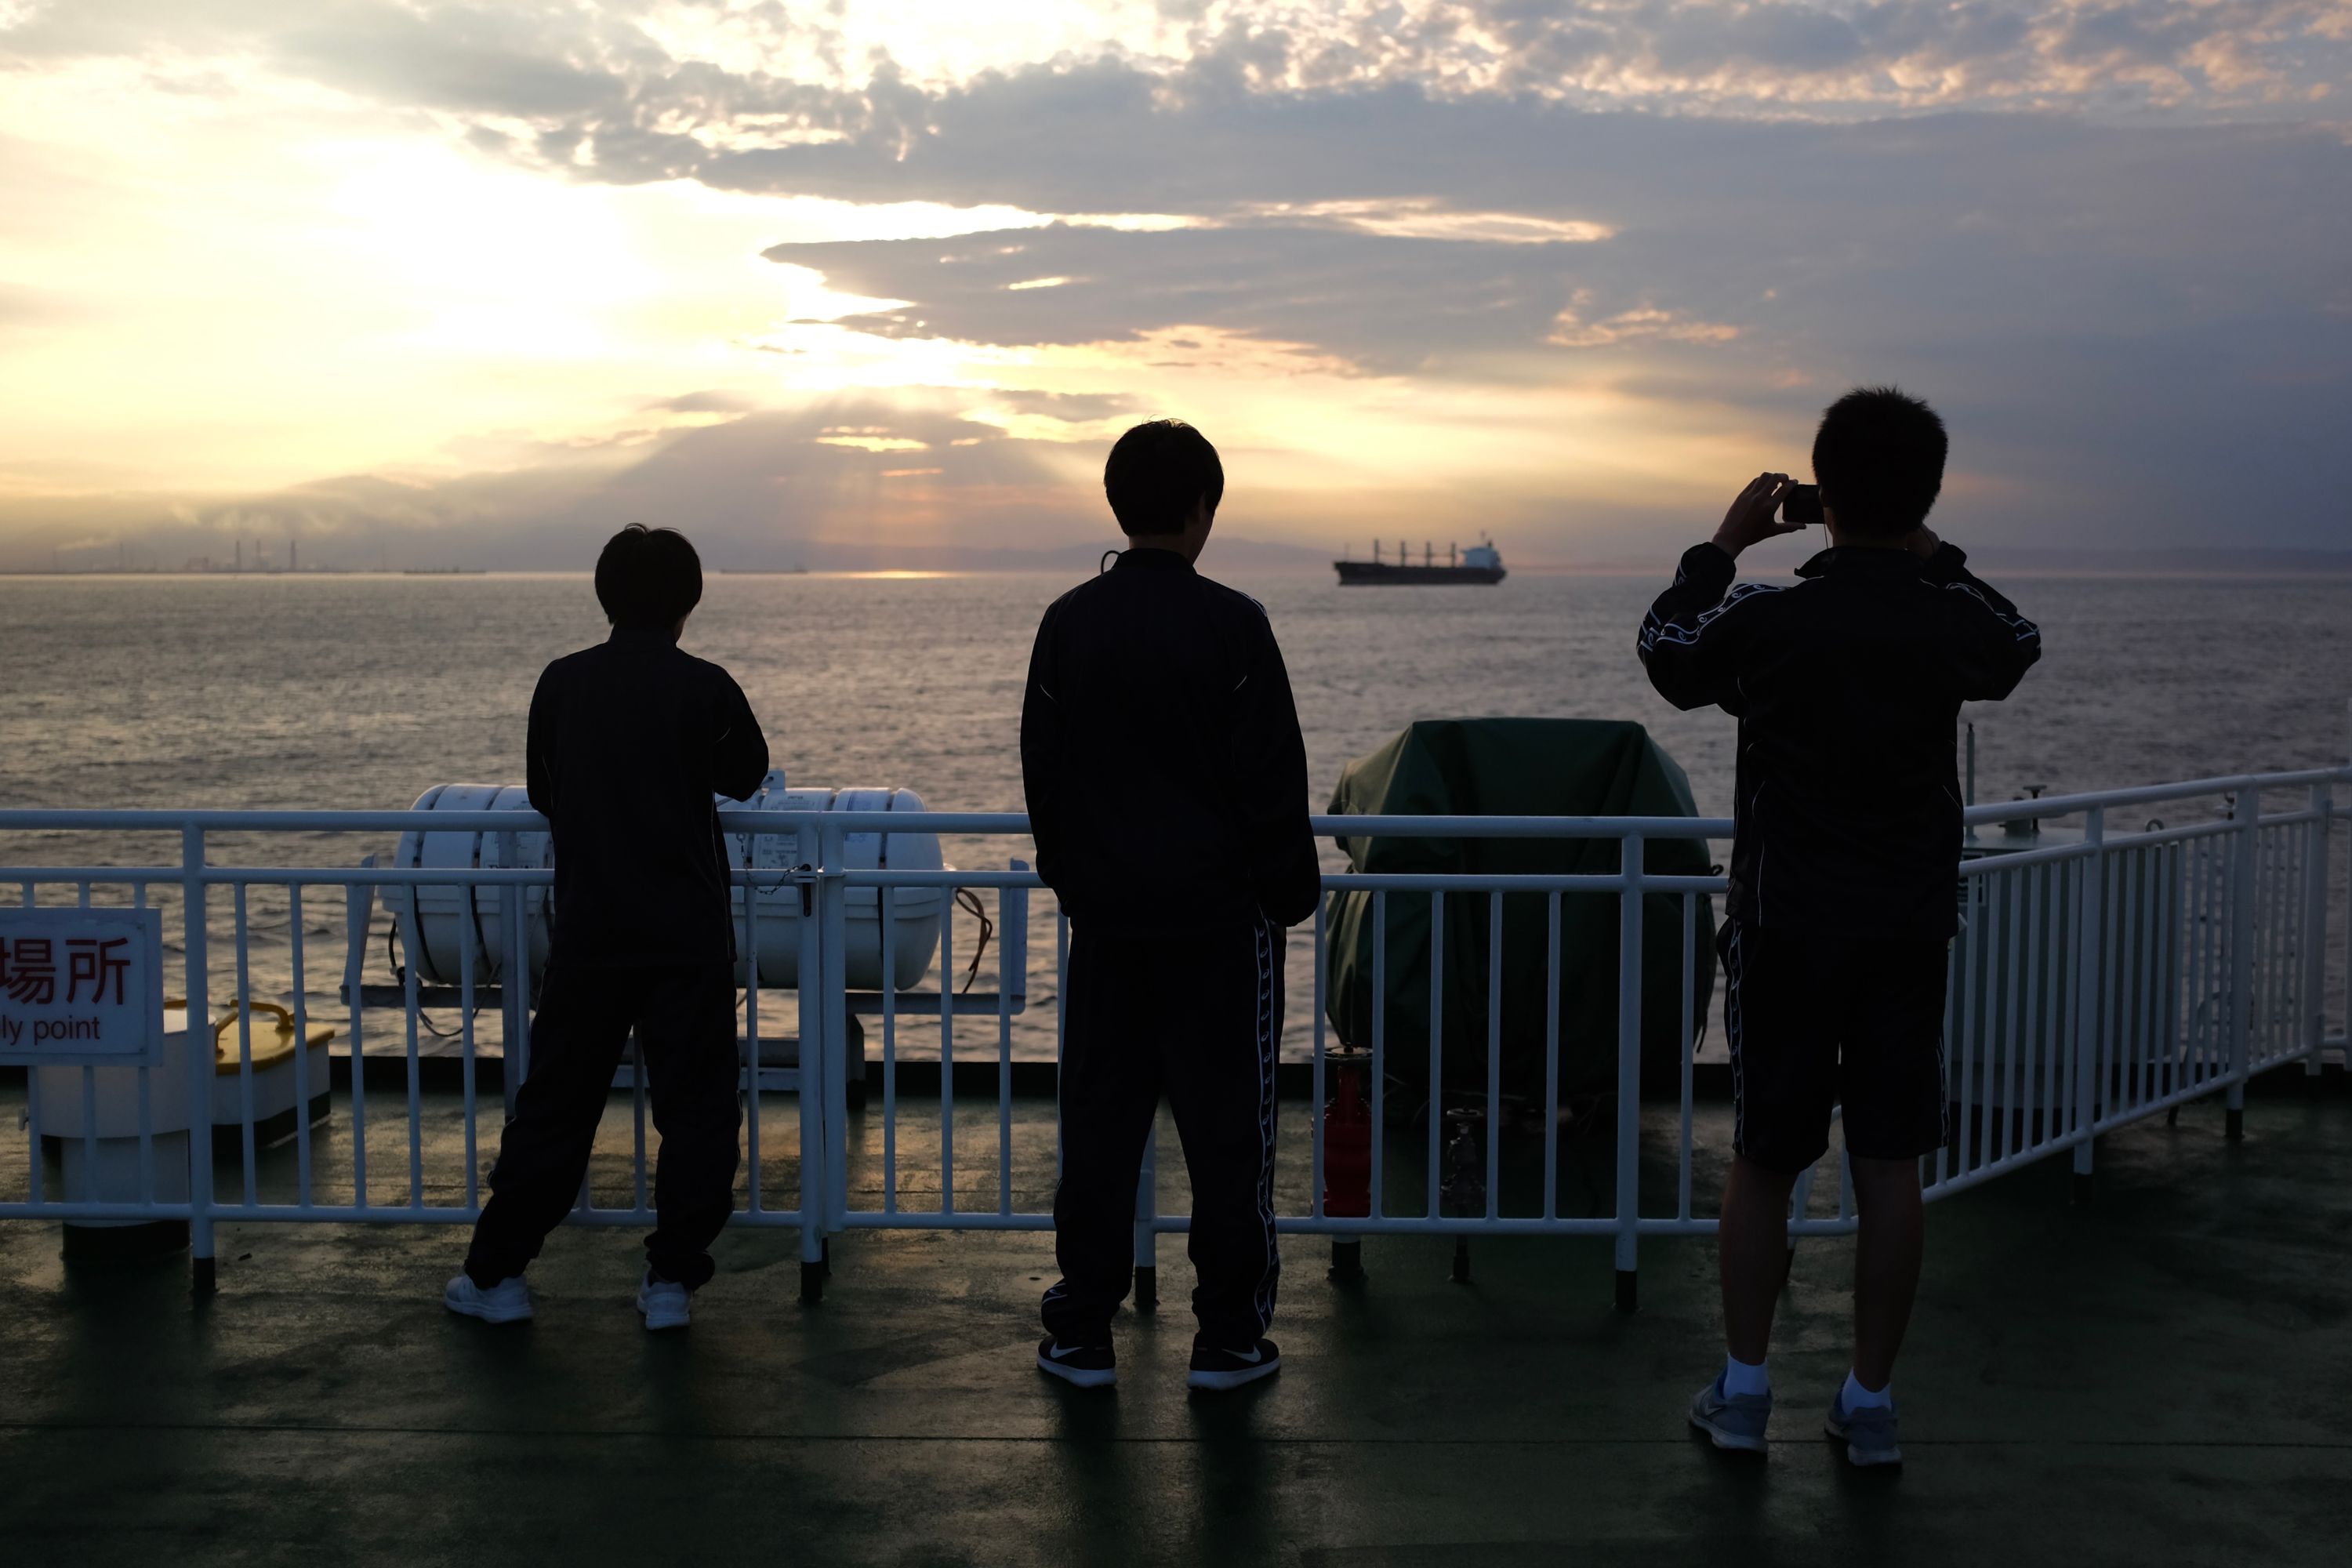 Three boys on the deck of the ferry look at the setting sun, one of the taking a picture with his phone.